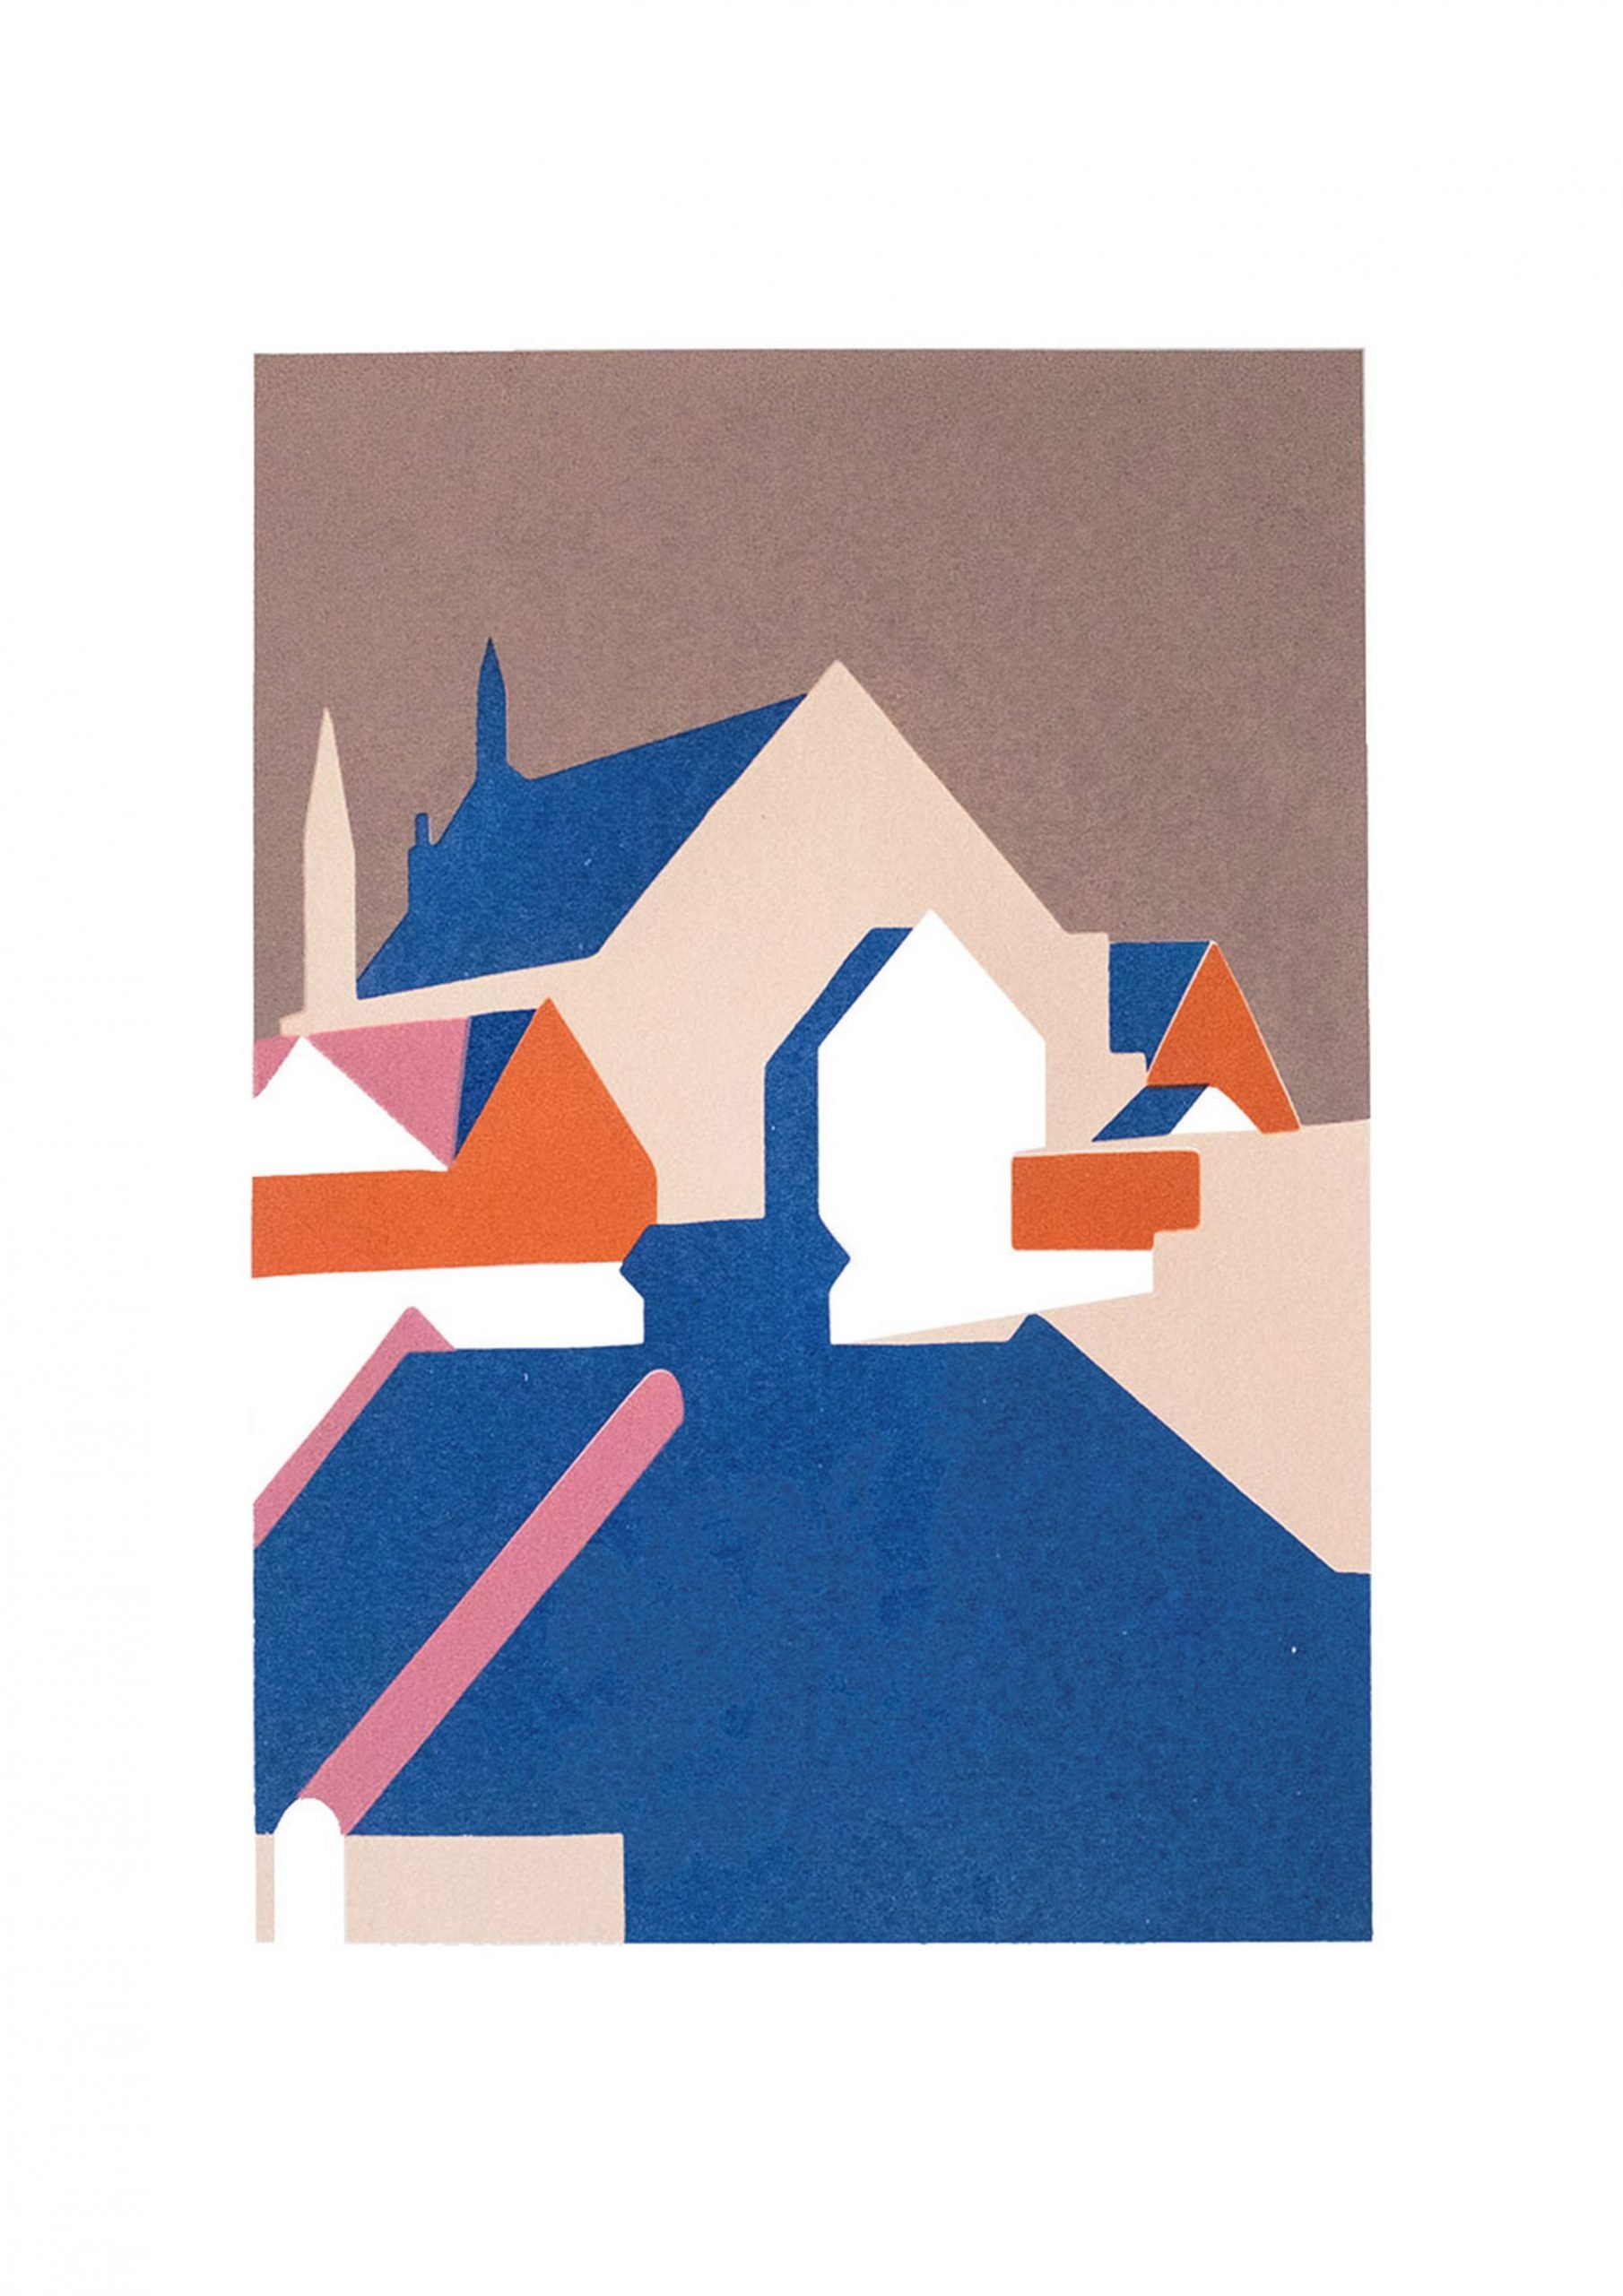 View from the Balcony no.2 (5 colour Screen Print) by Bianca Wilson. 